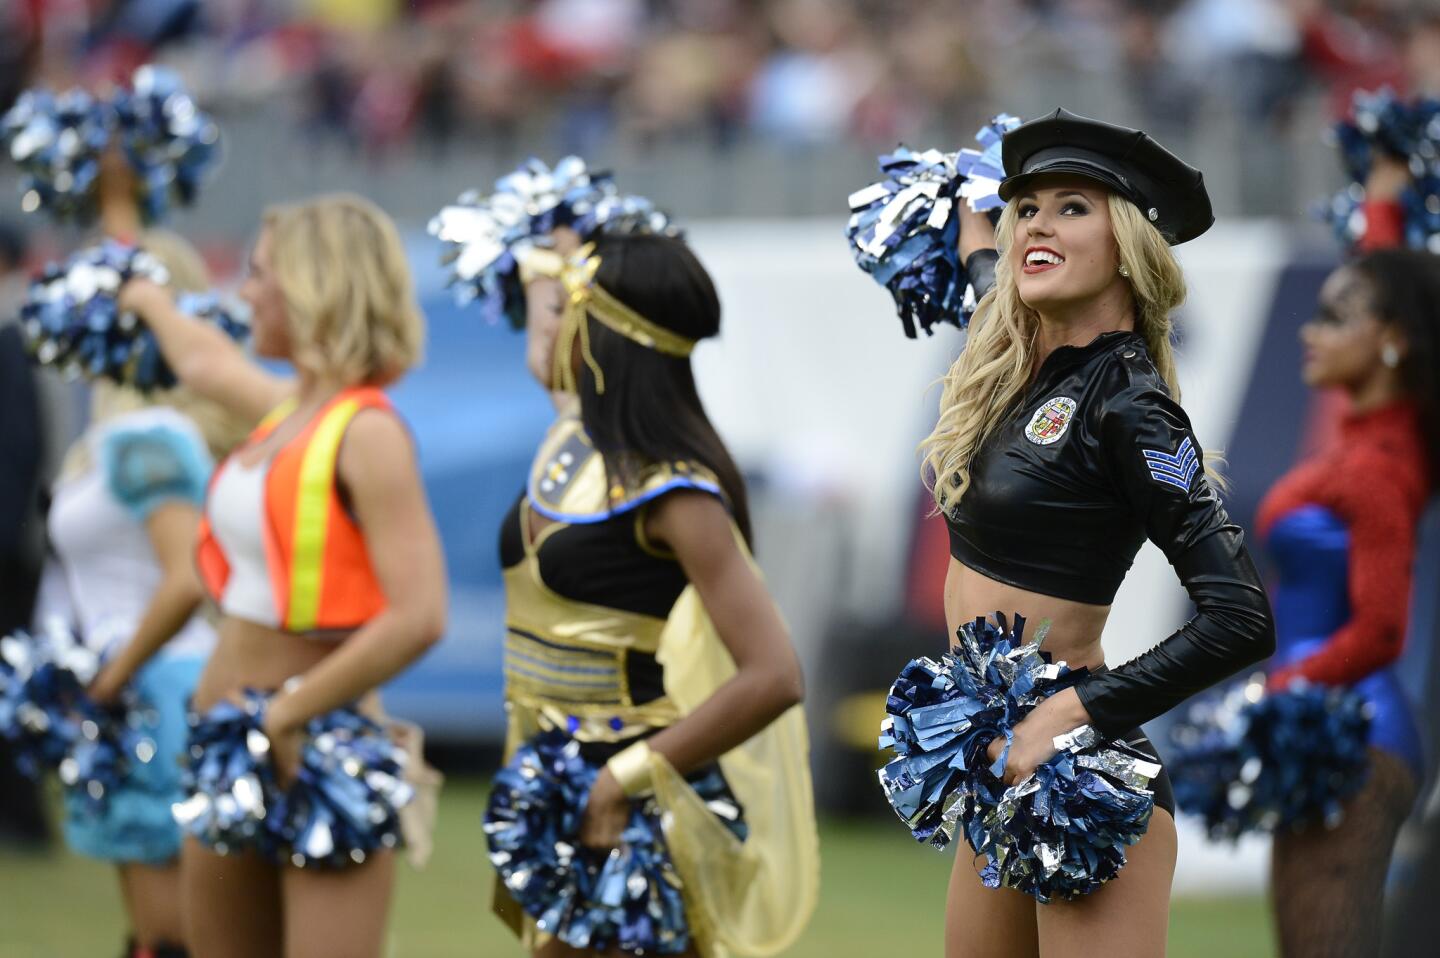 Tennessee Titans cheerleaders perform in Halloween costumes in the second half of an NFL football game between the Titans and the Atlanta Falcons Sunday, Oct. 25, 2015, in Nashville, Tenn. (AP Photo/Mark Zaleski)